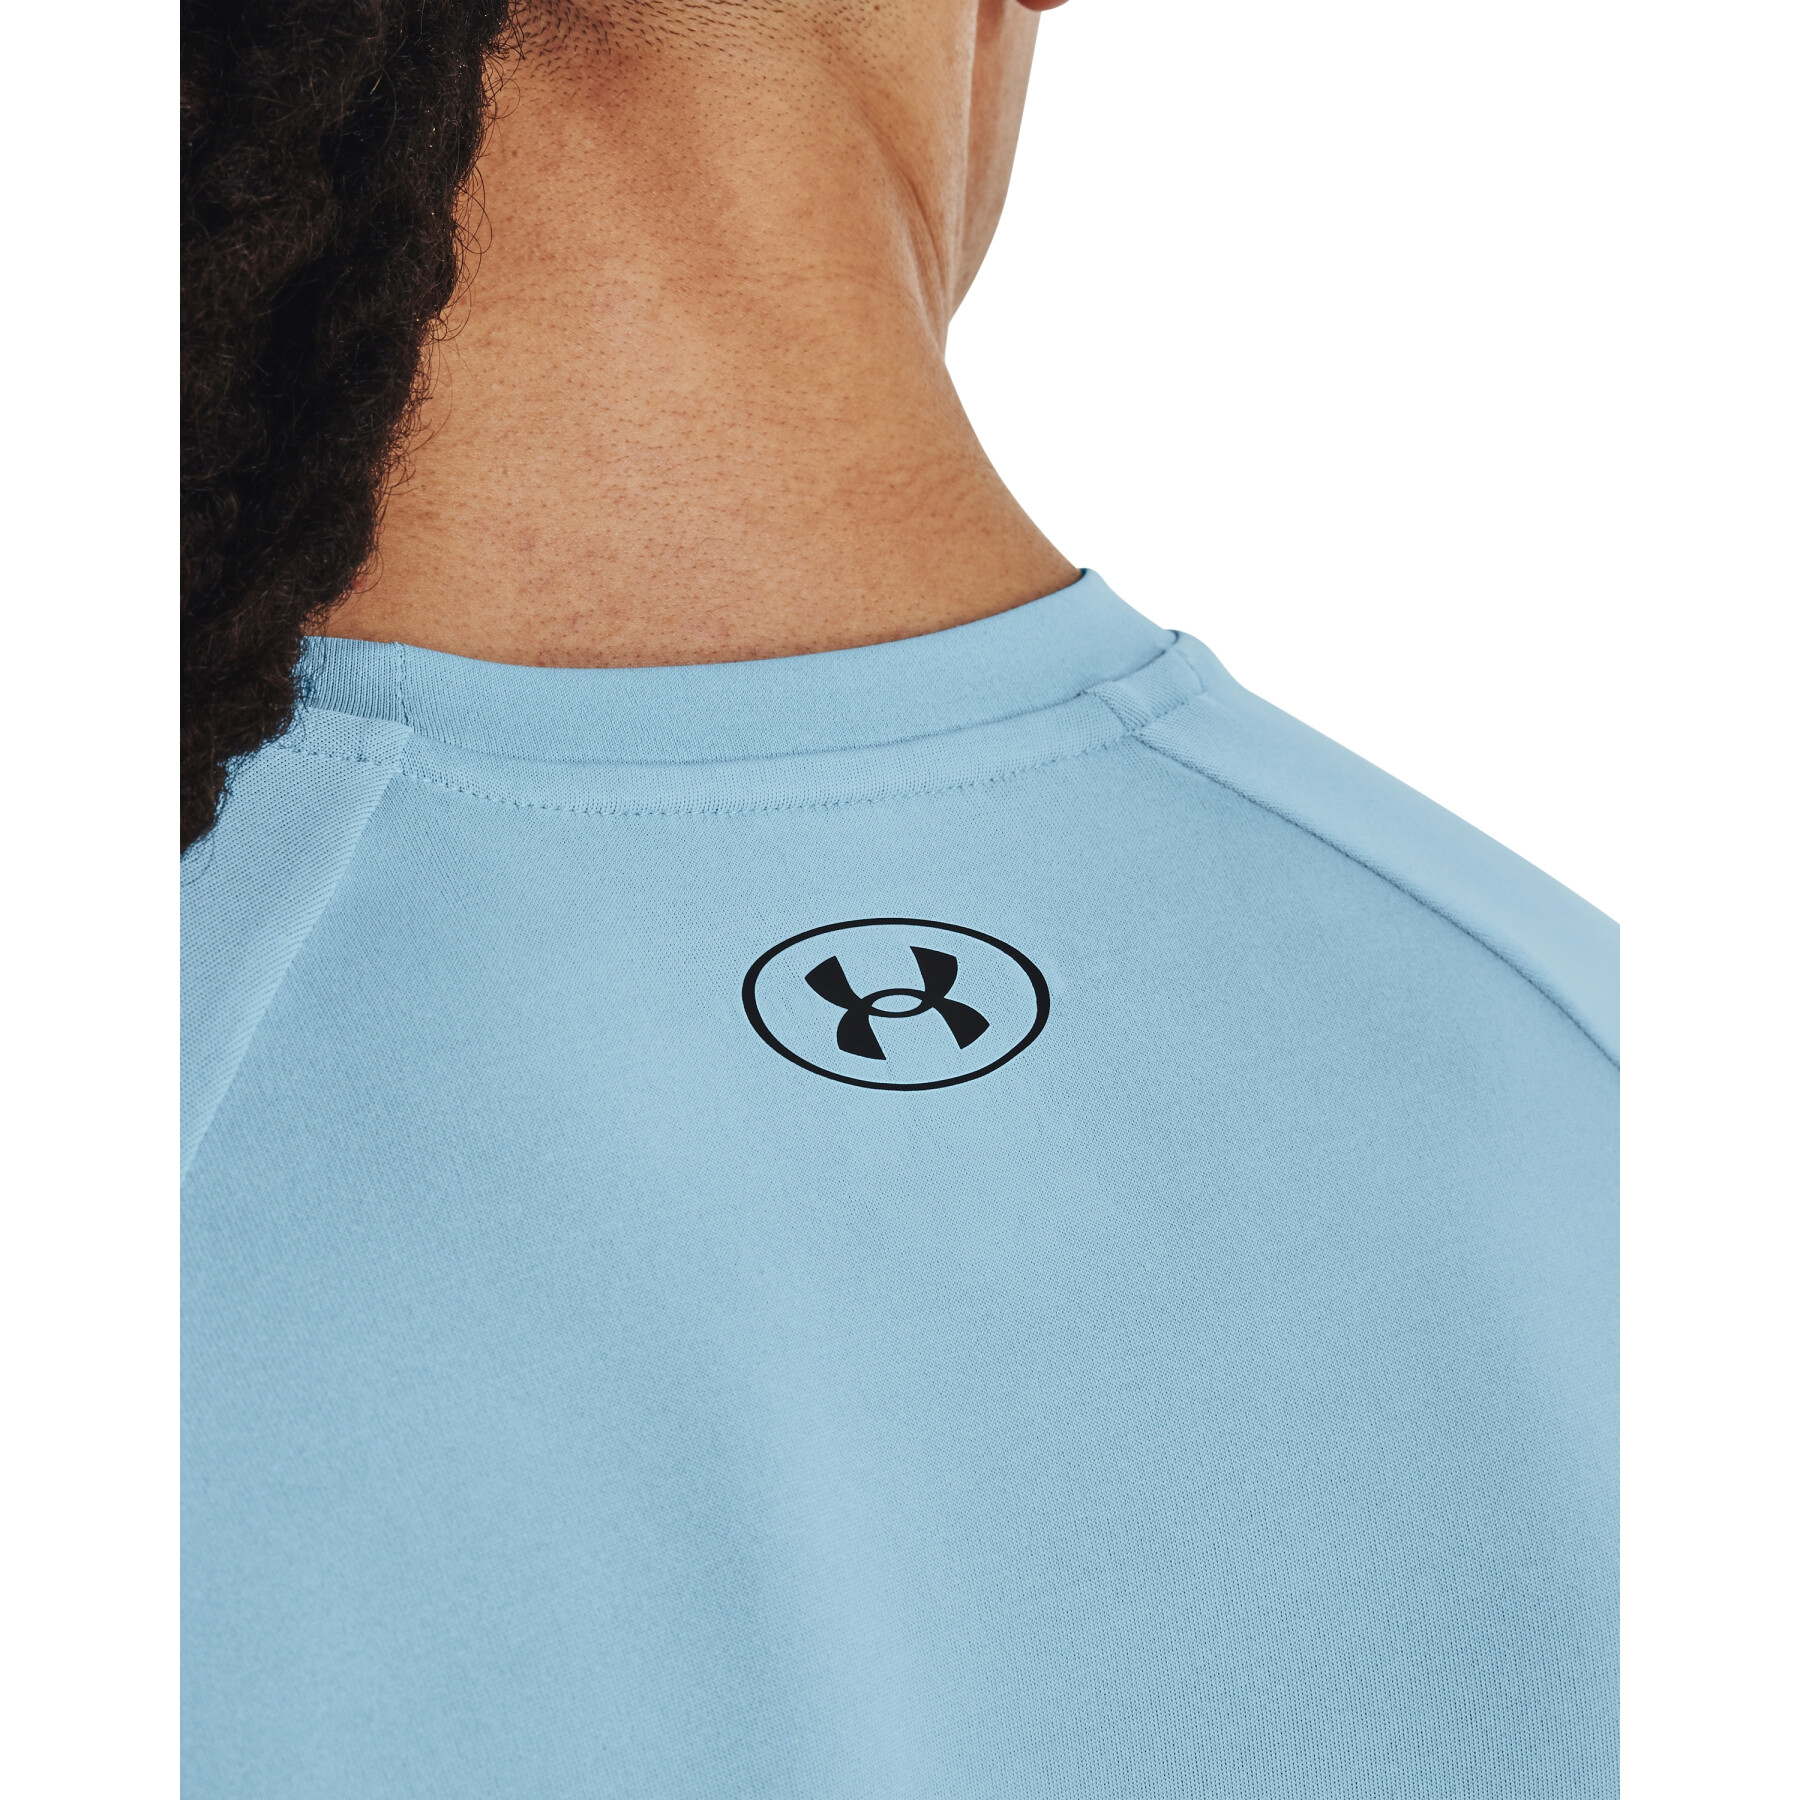 Maillot Under Armour Tech